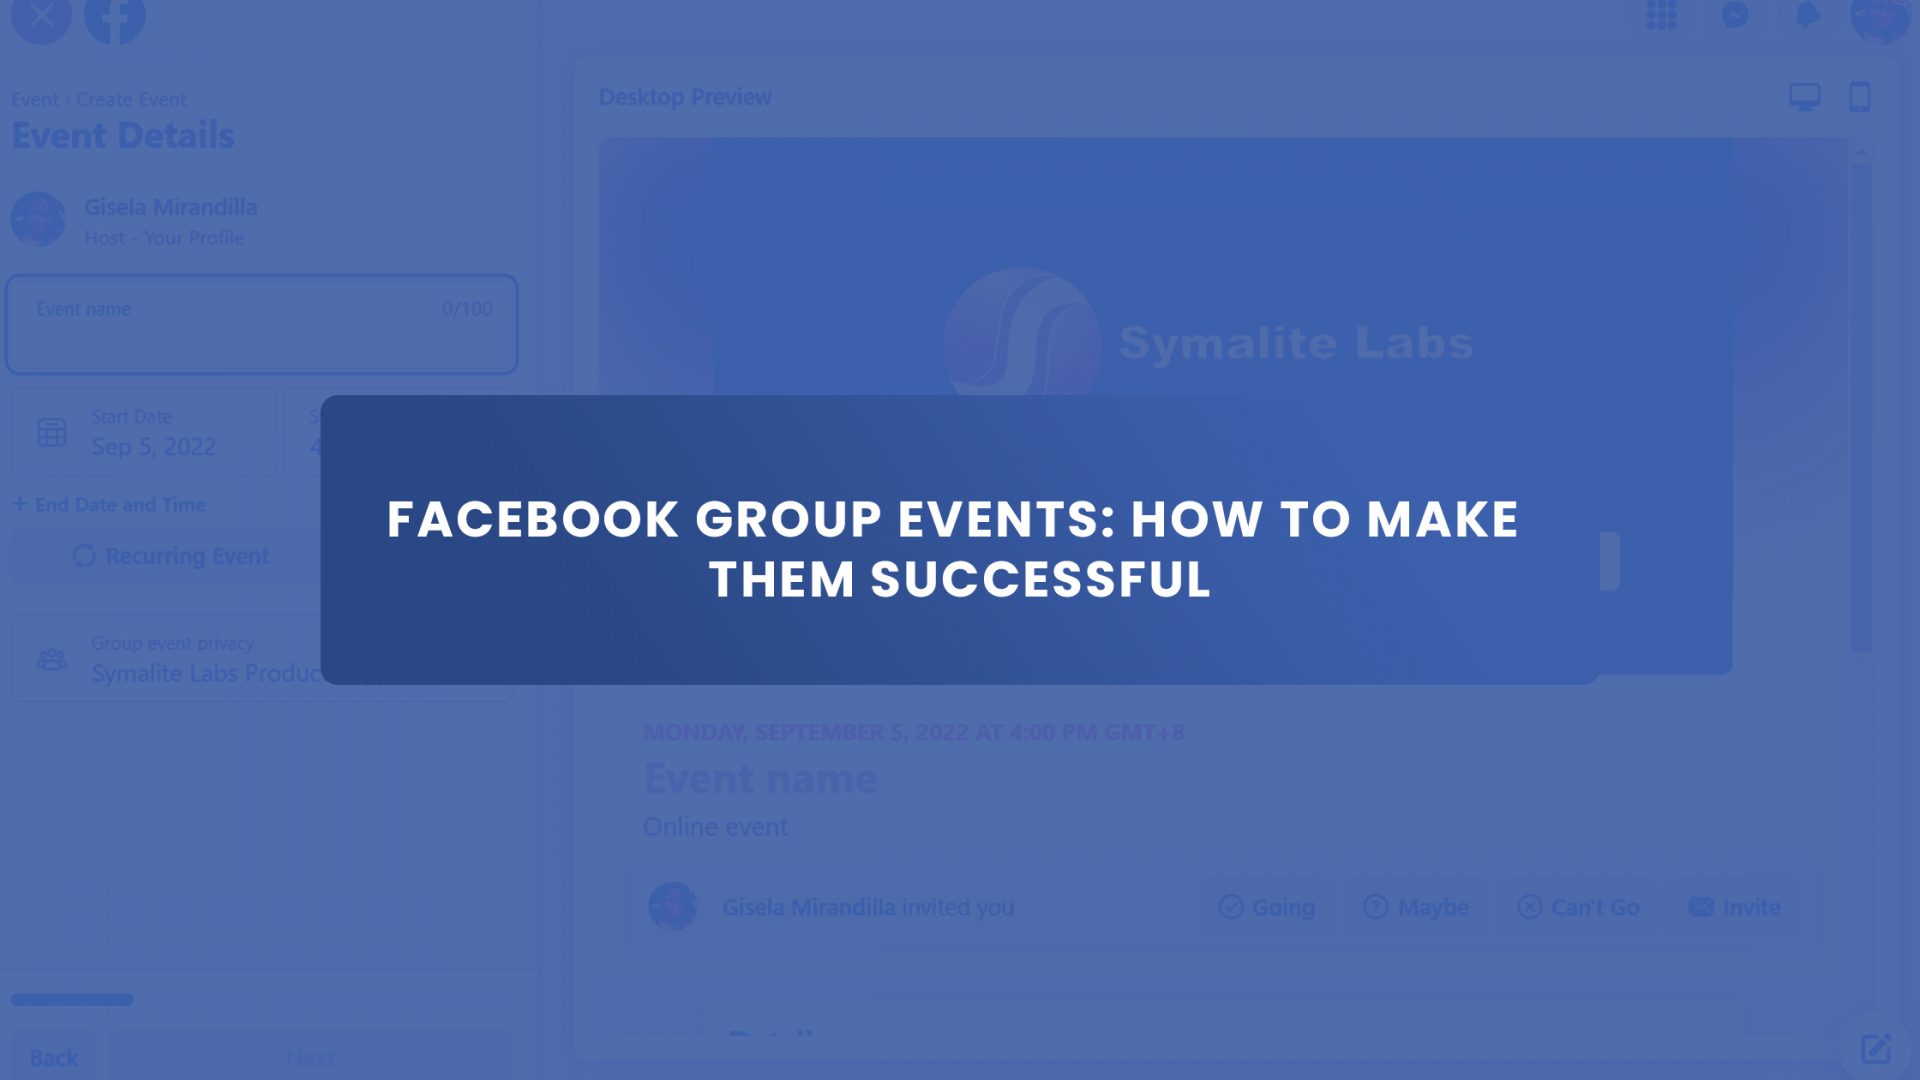 Facebook Group Events - How to Make Them Successful